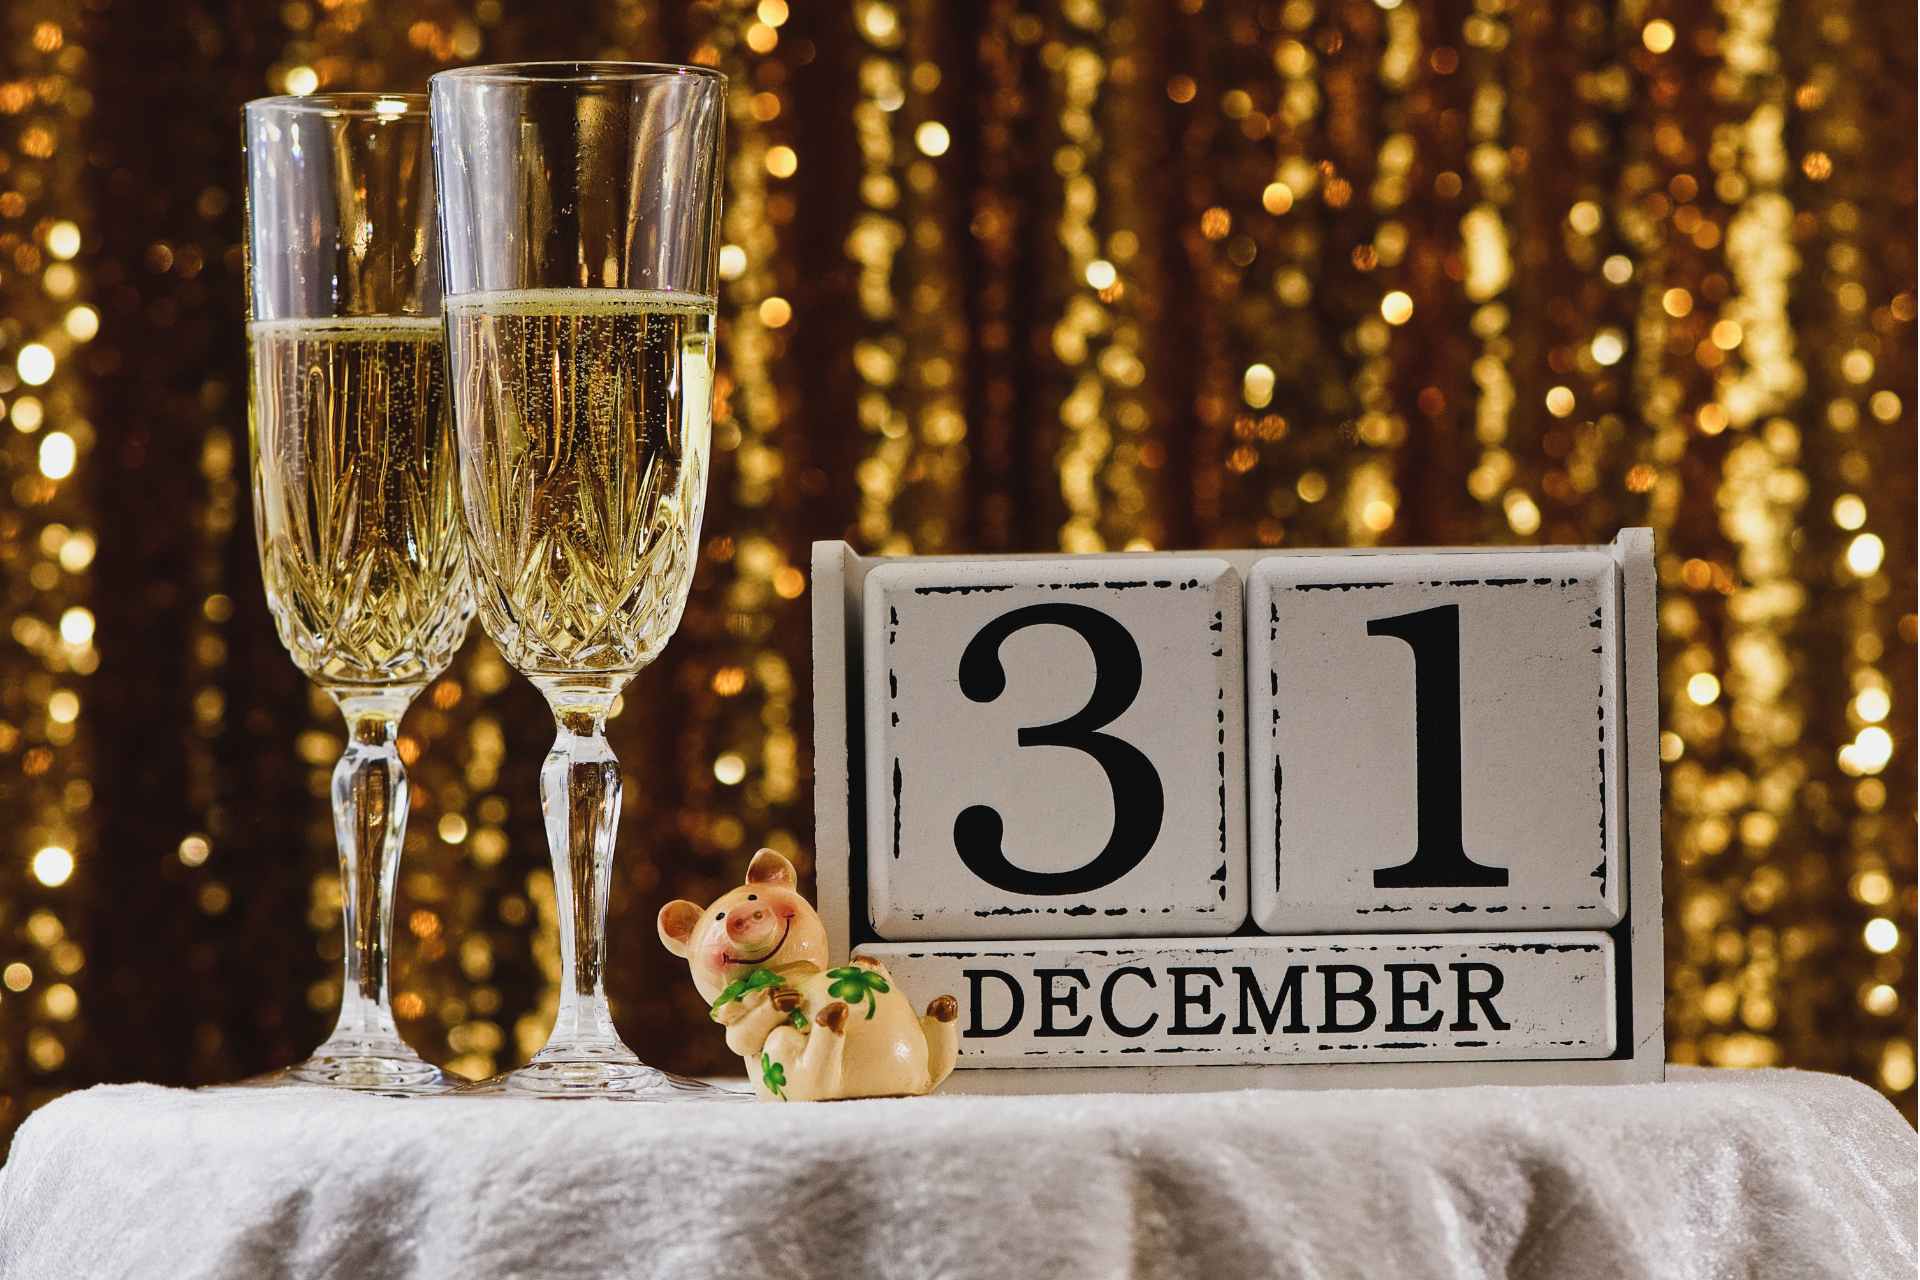 Stonewall Resort offering New Year’s Eve celebrations and pre and post